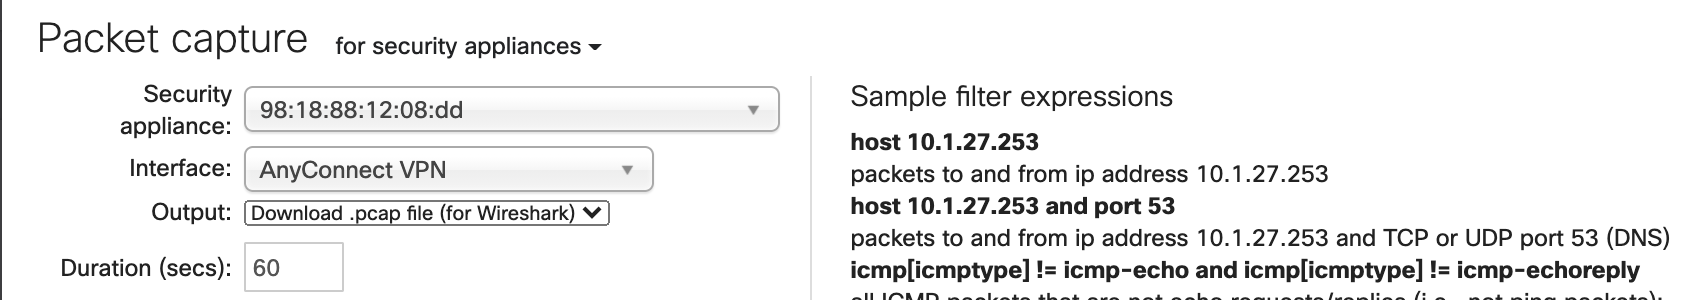 Anyconnect packet capture from Dashboard 